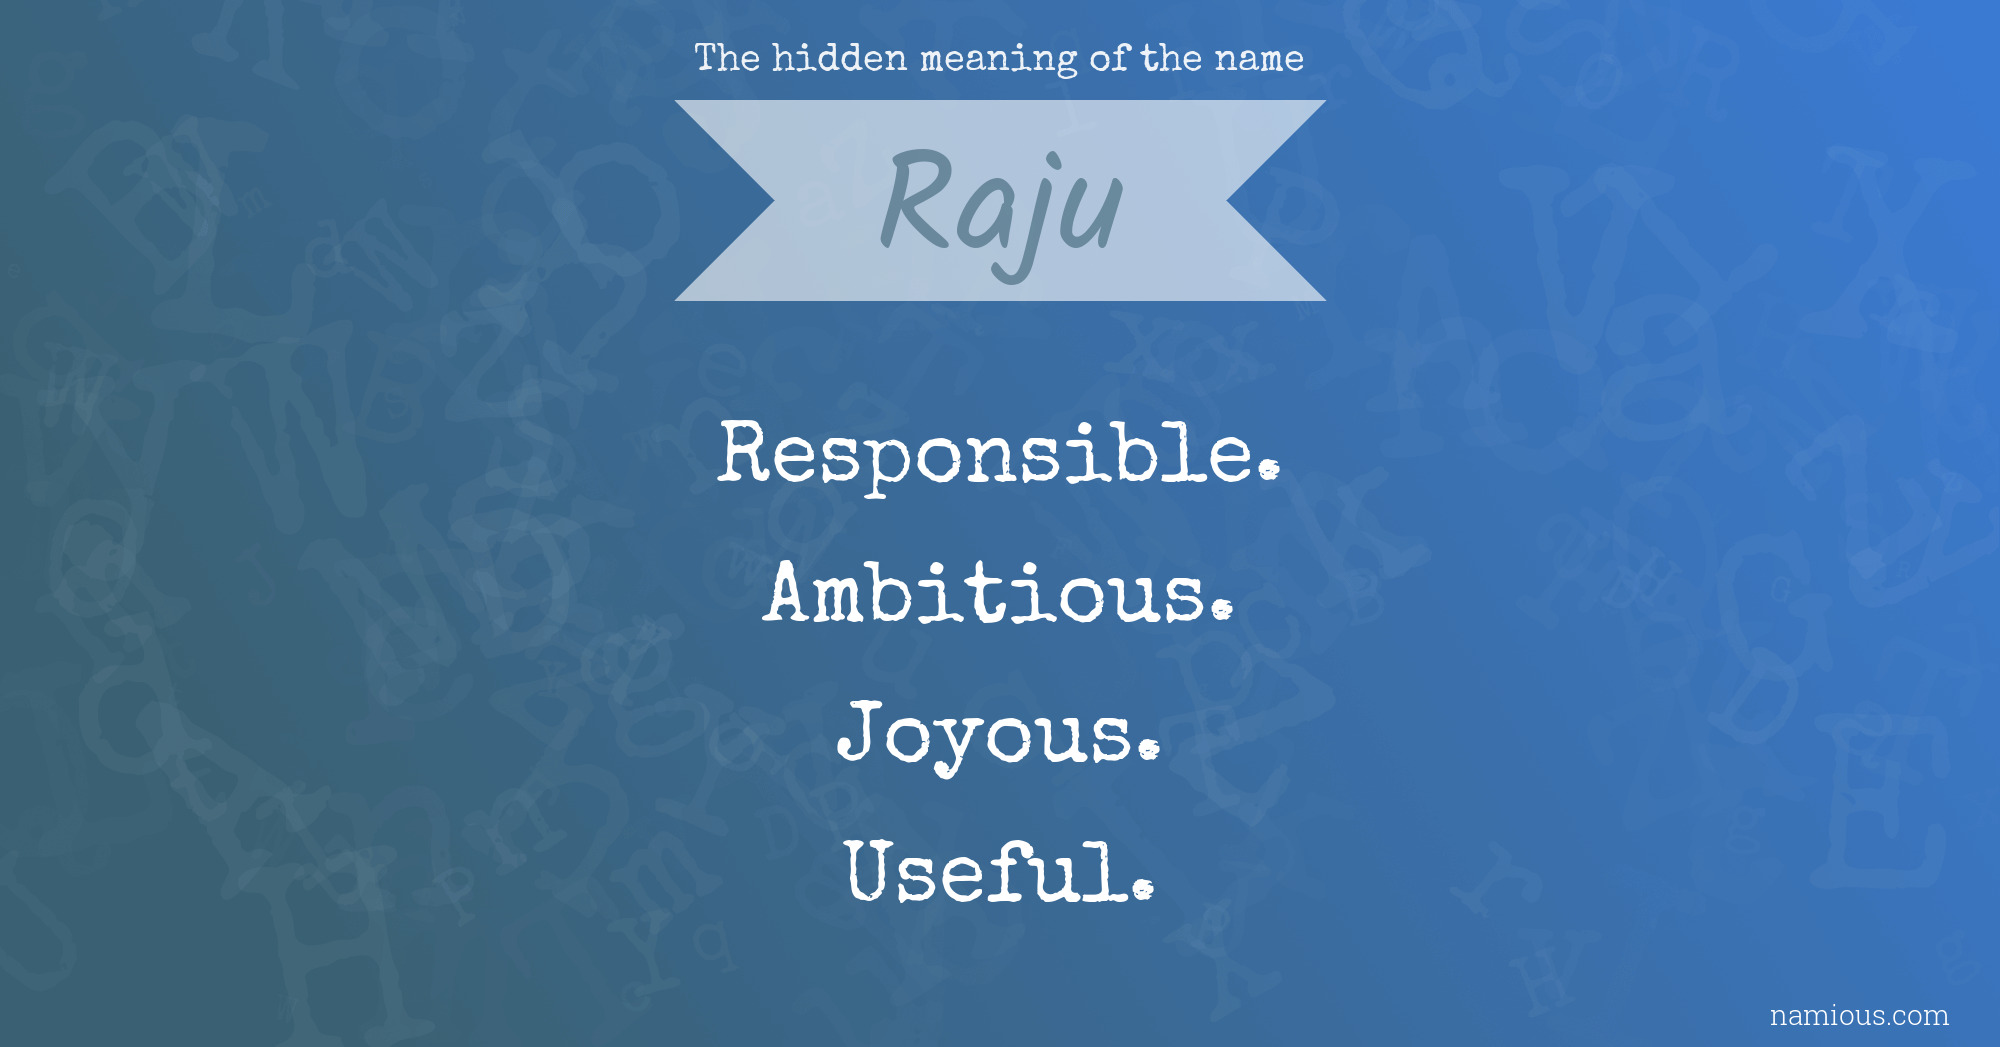 The hidden meaning of the name Raju